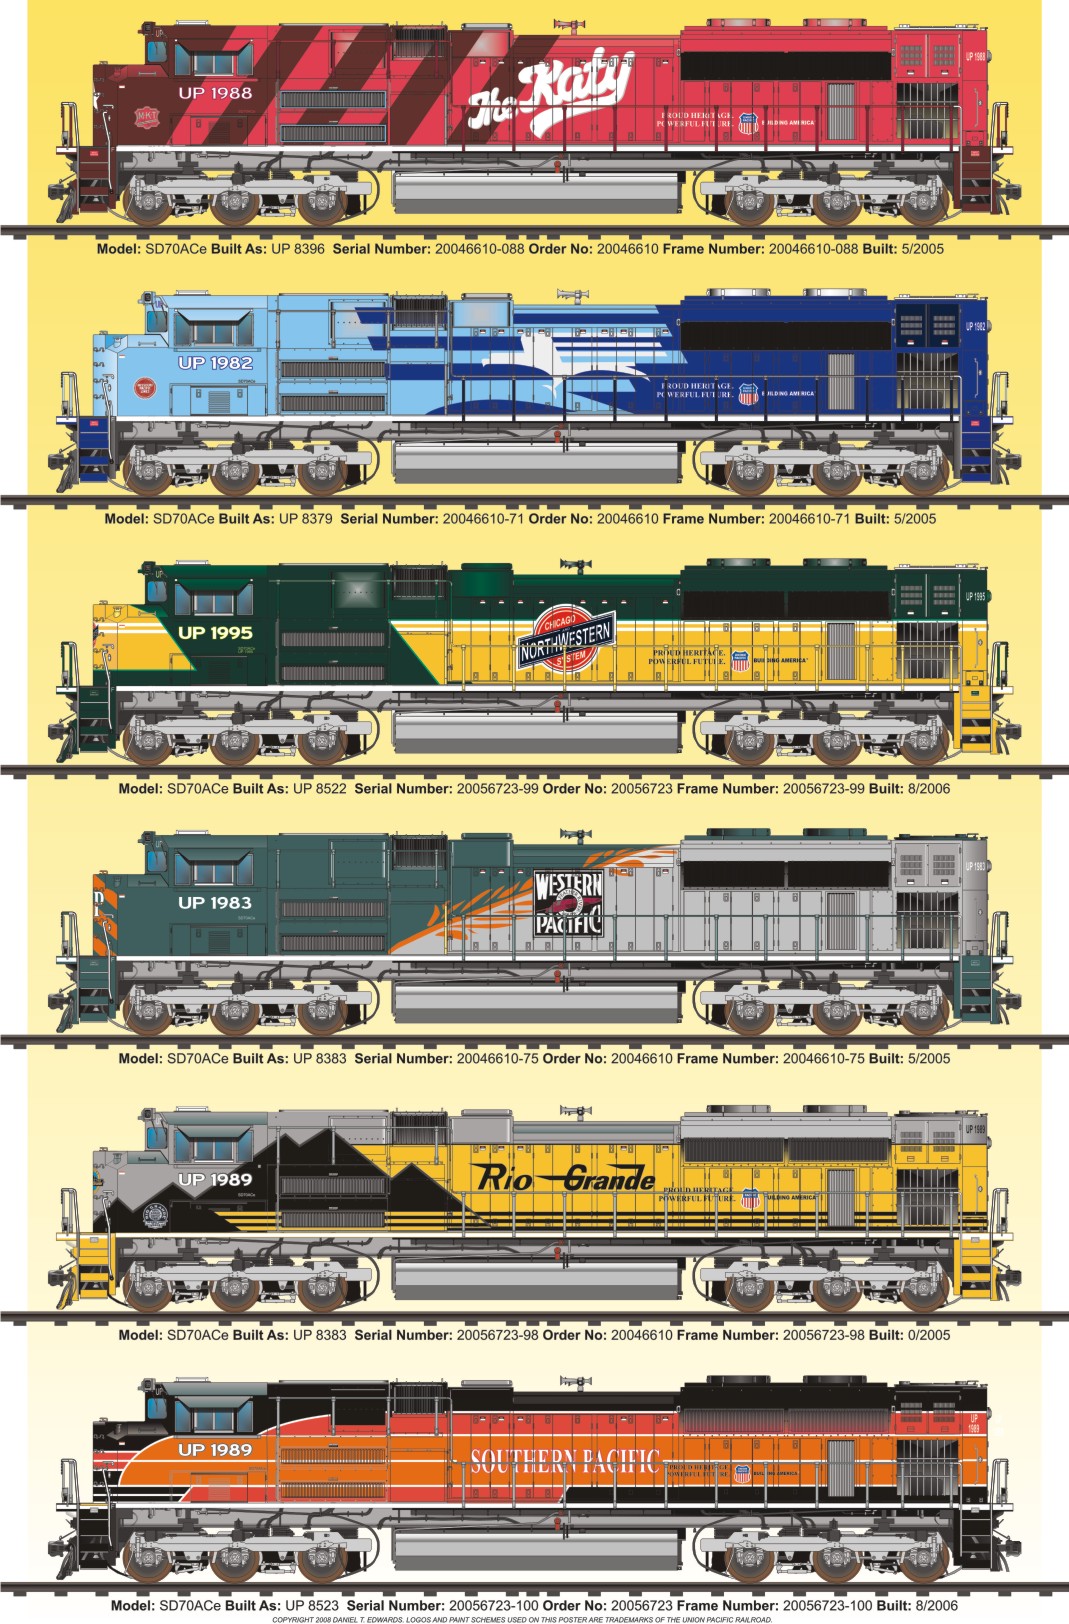 Union Pacific 6 Heritage Locomotives Railroad Poster - A 